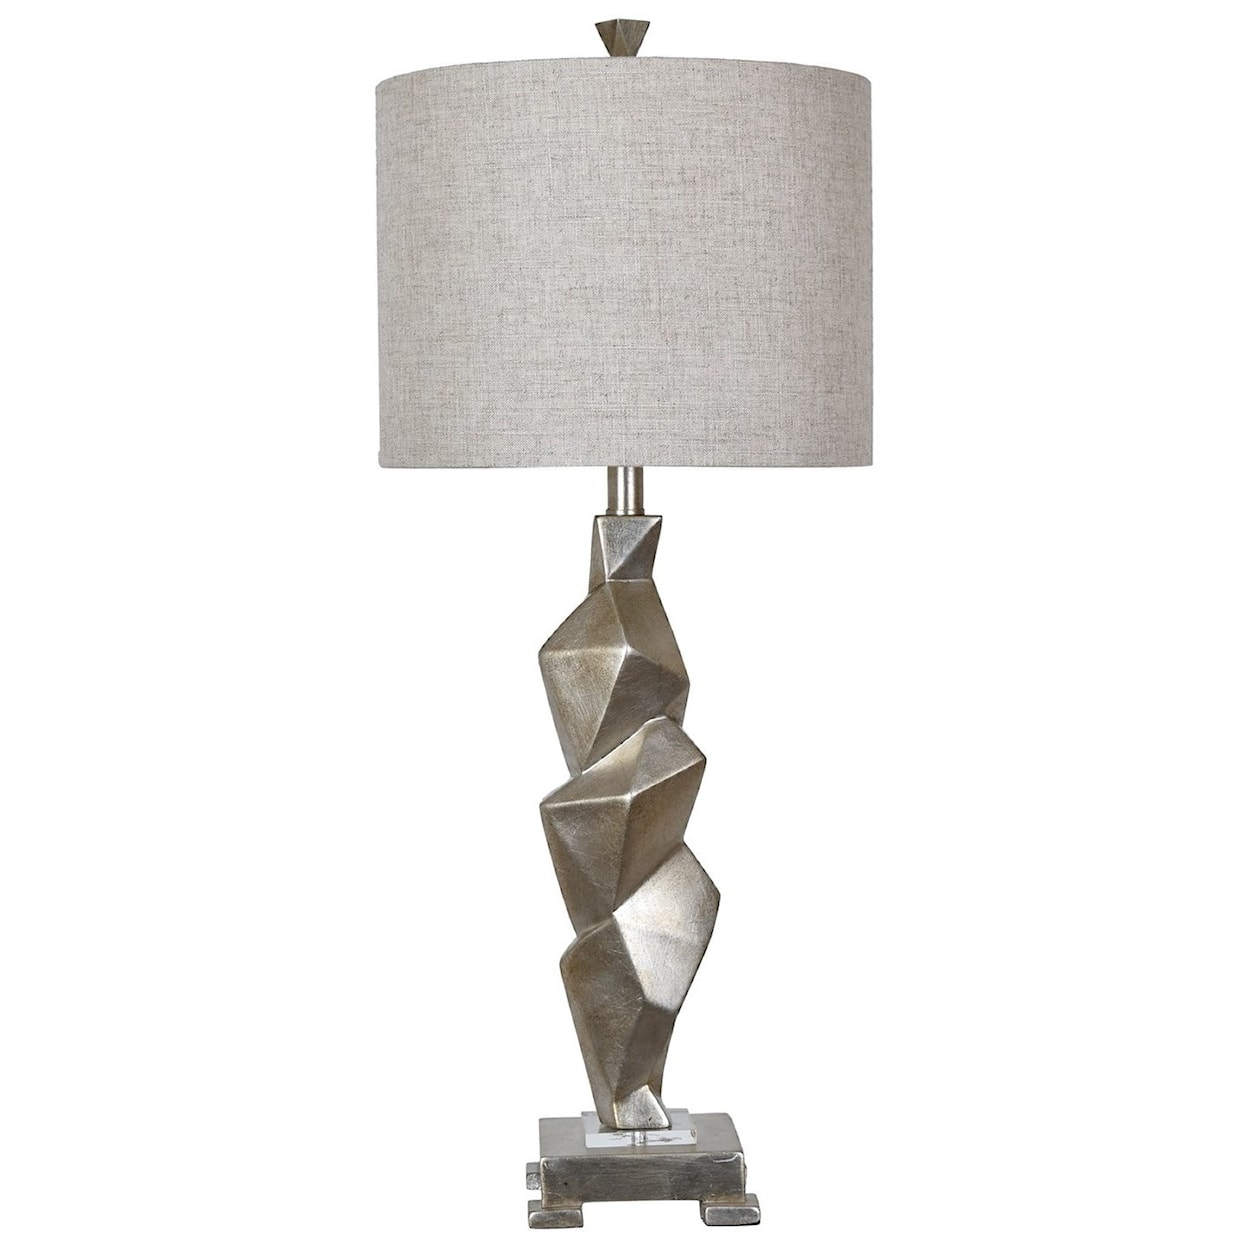 Crestview Collection Lighting Polygon Table Lamp